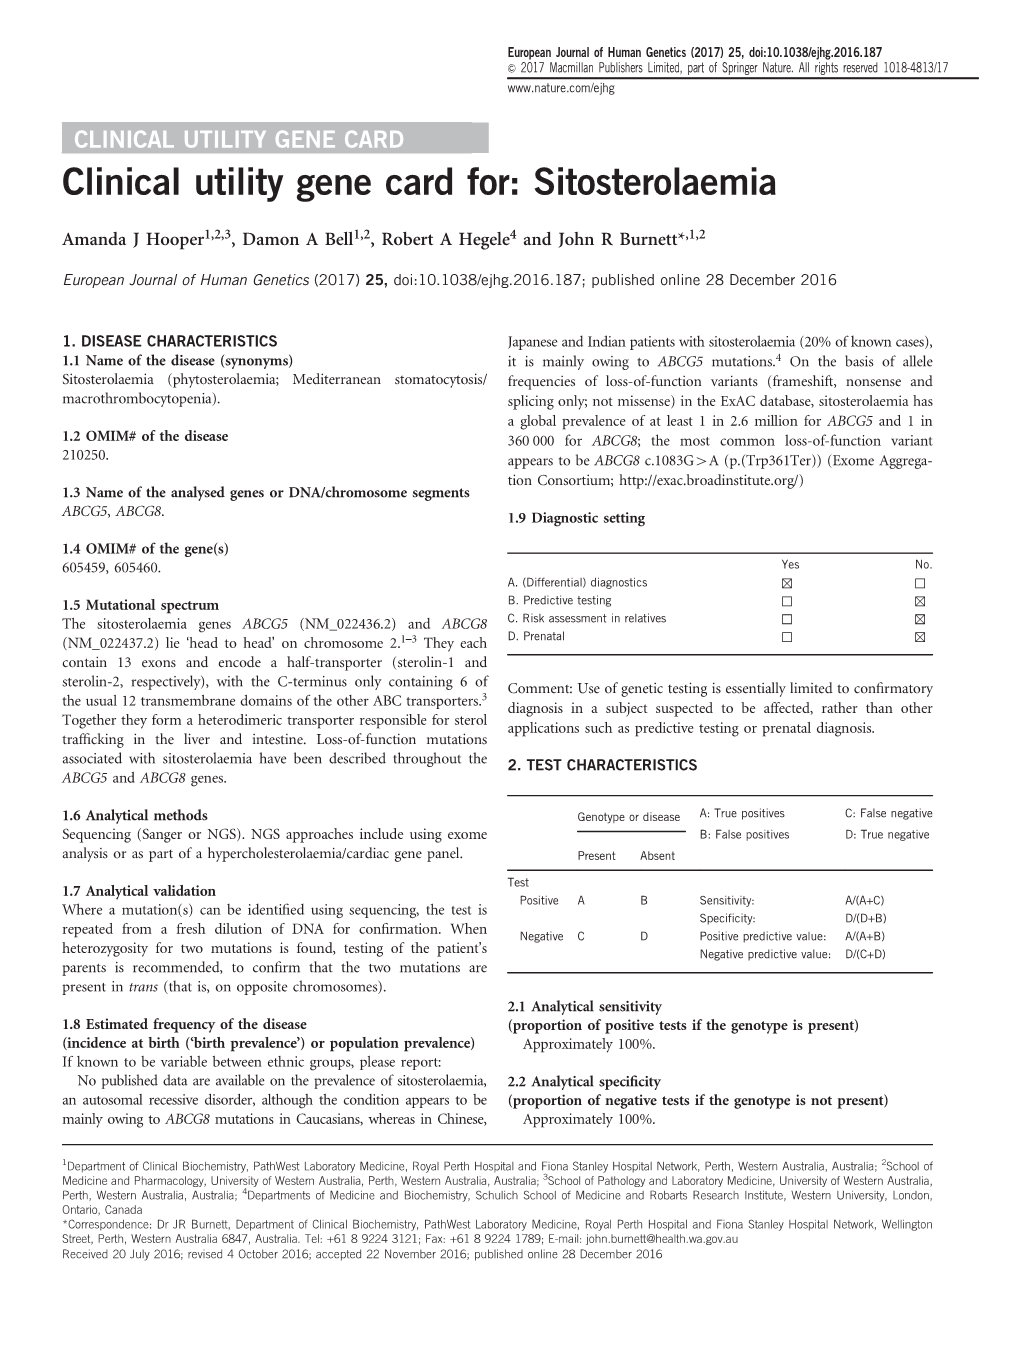 Clinical Utility Gene Card For: Sitosterolaemia